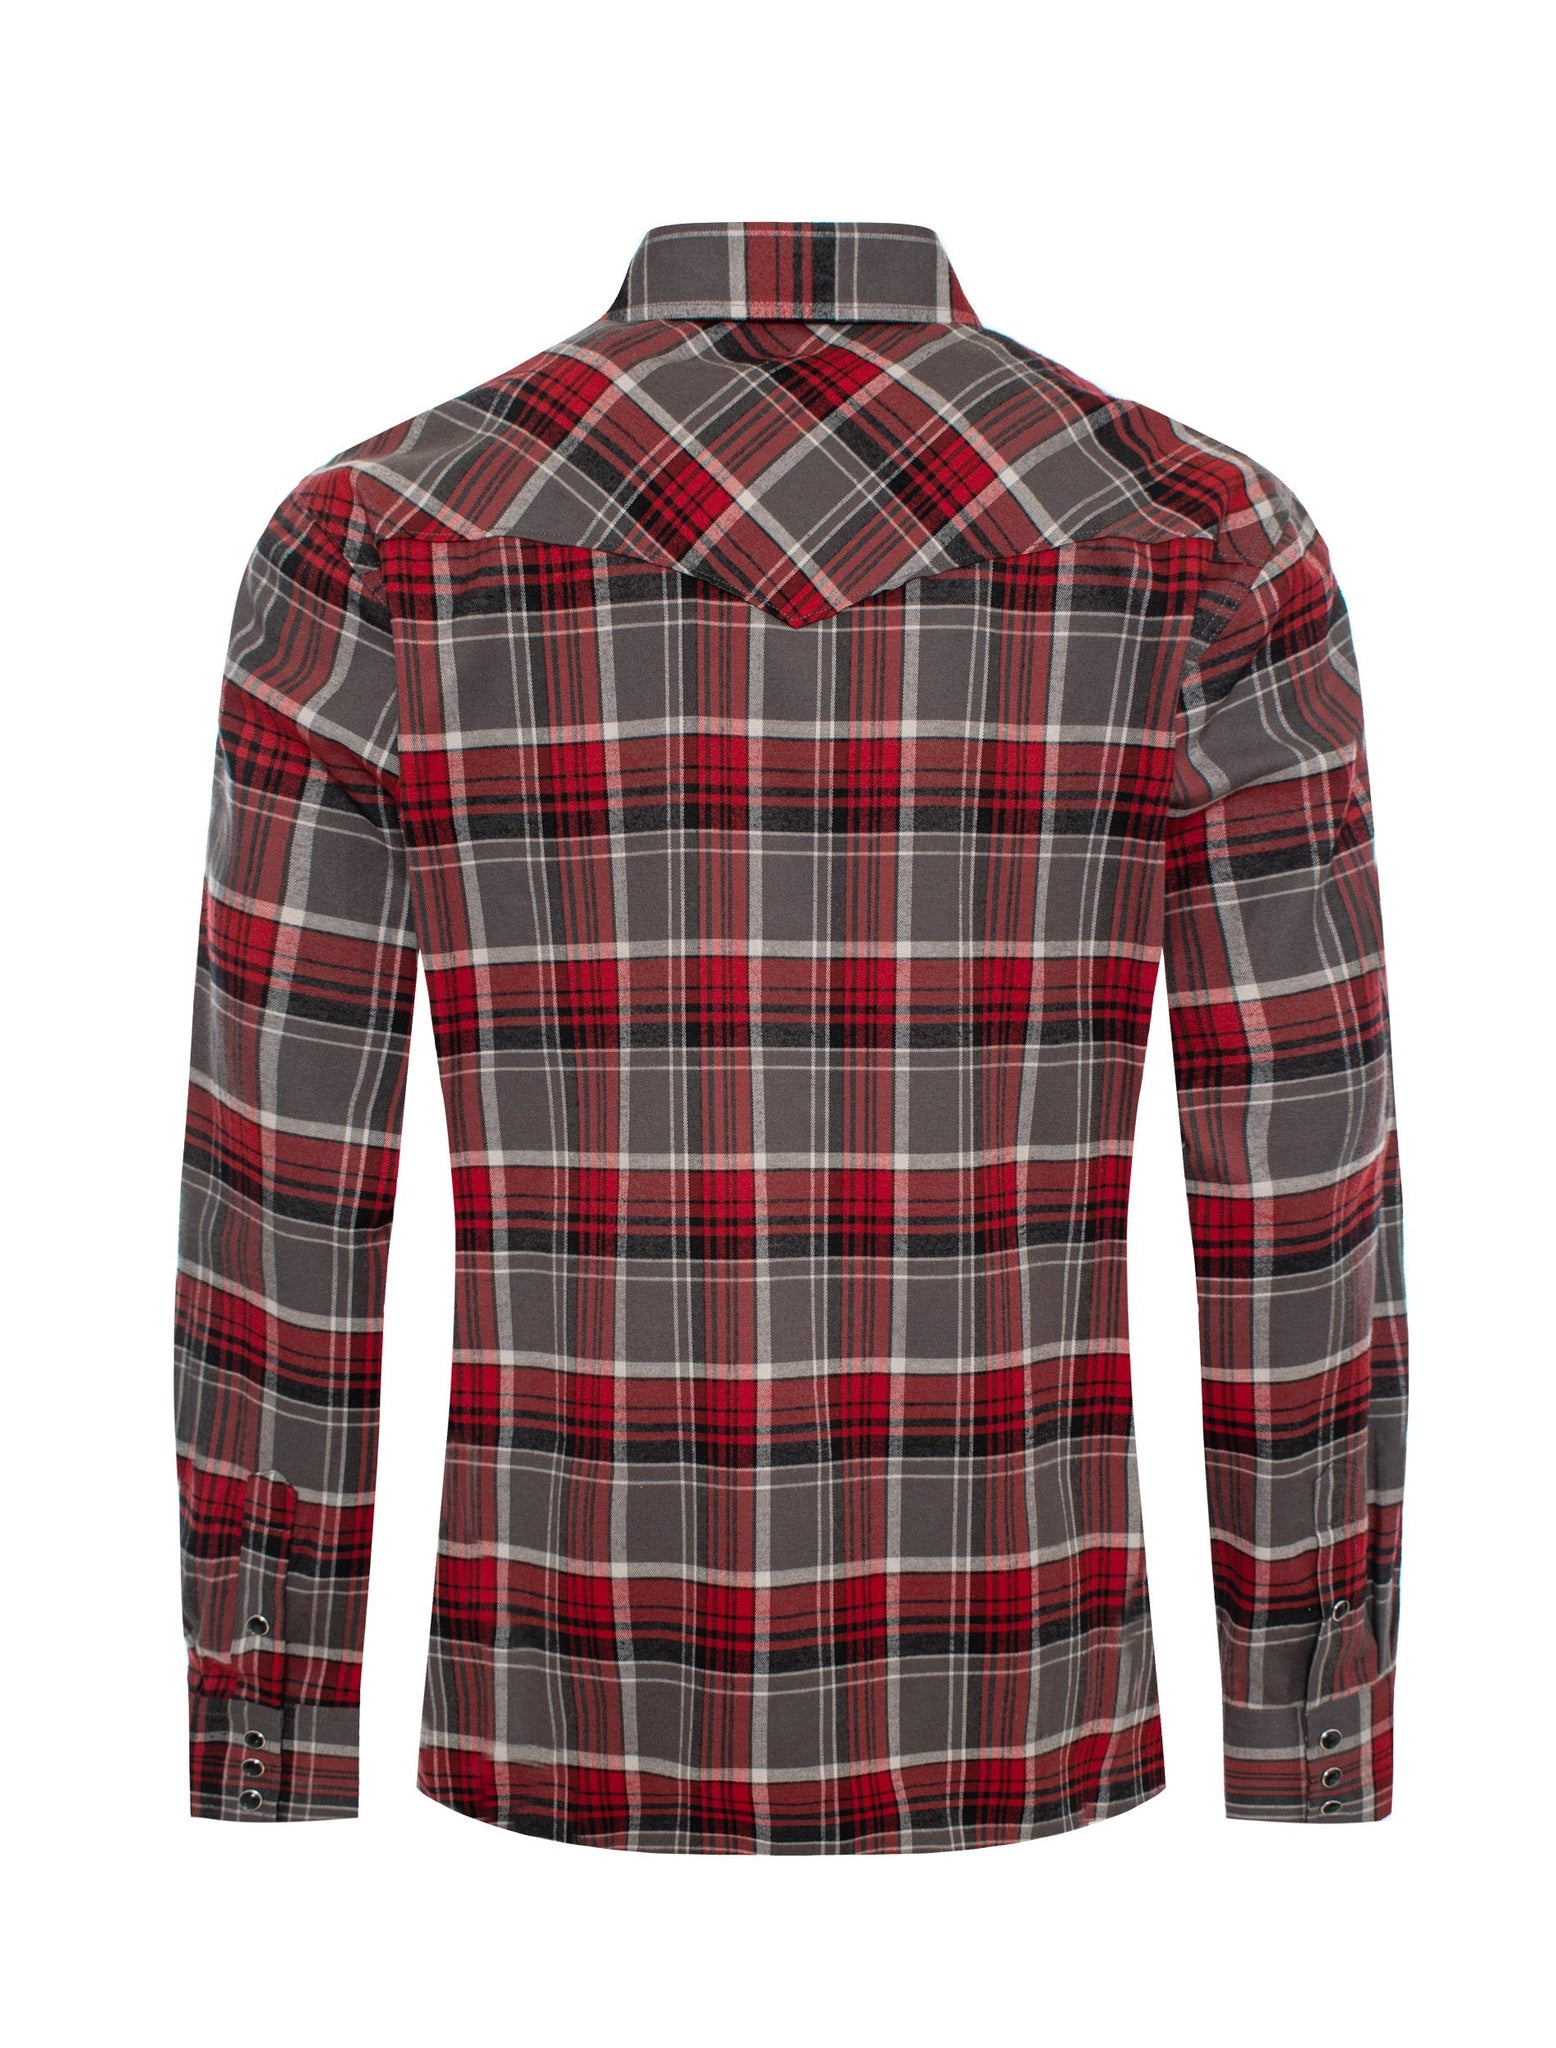 Men's Western Flannel Shirts With Snap Buttons -FLS300-310